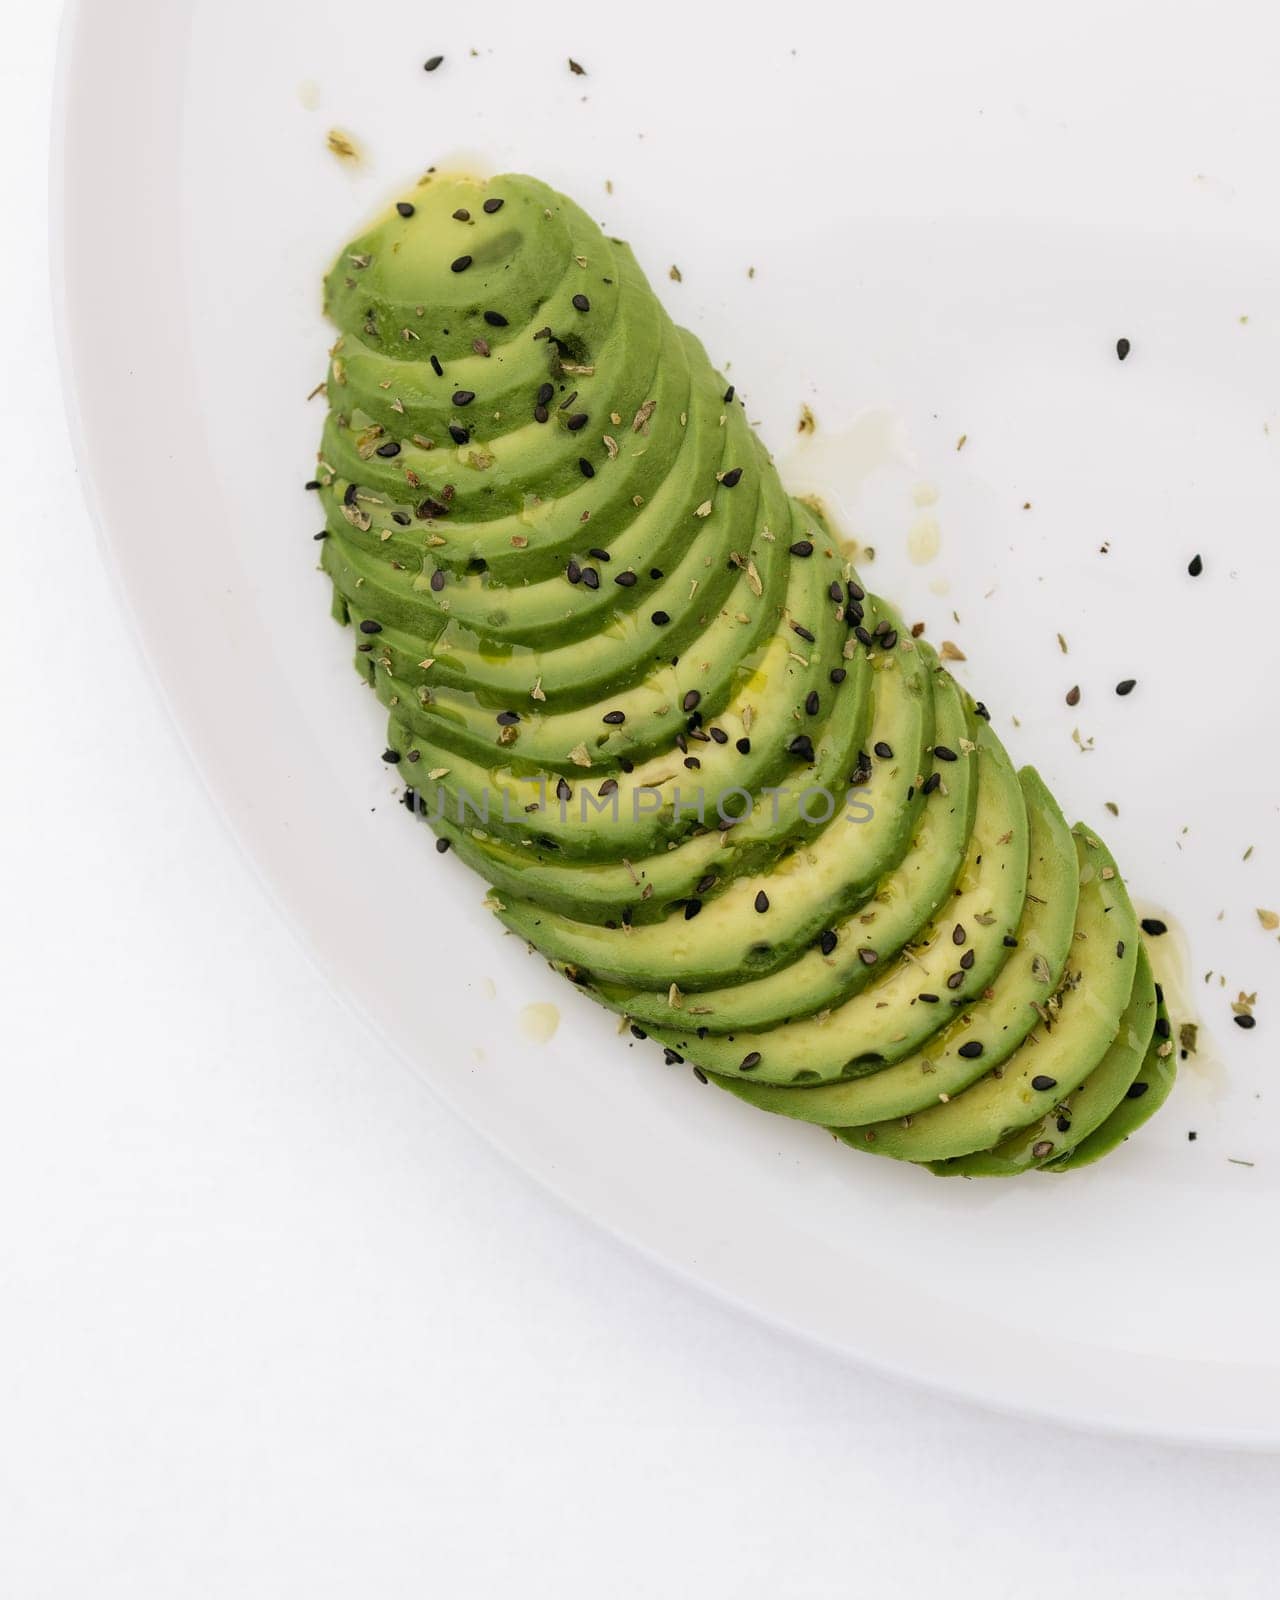 Sliced avocado fan garnished with sesame seeds on a white plate by apavlin